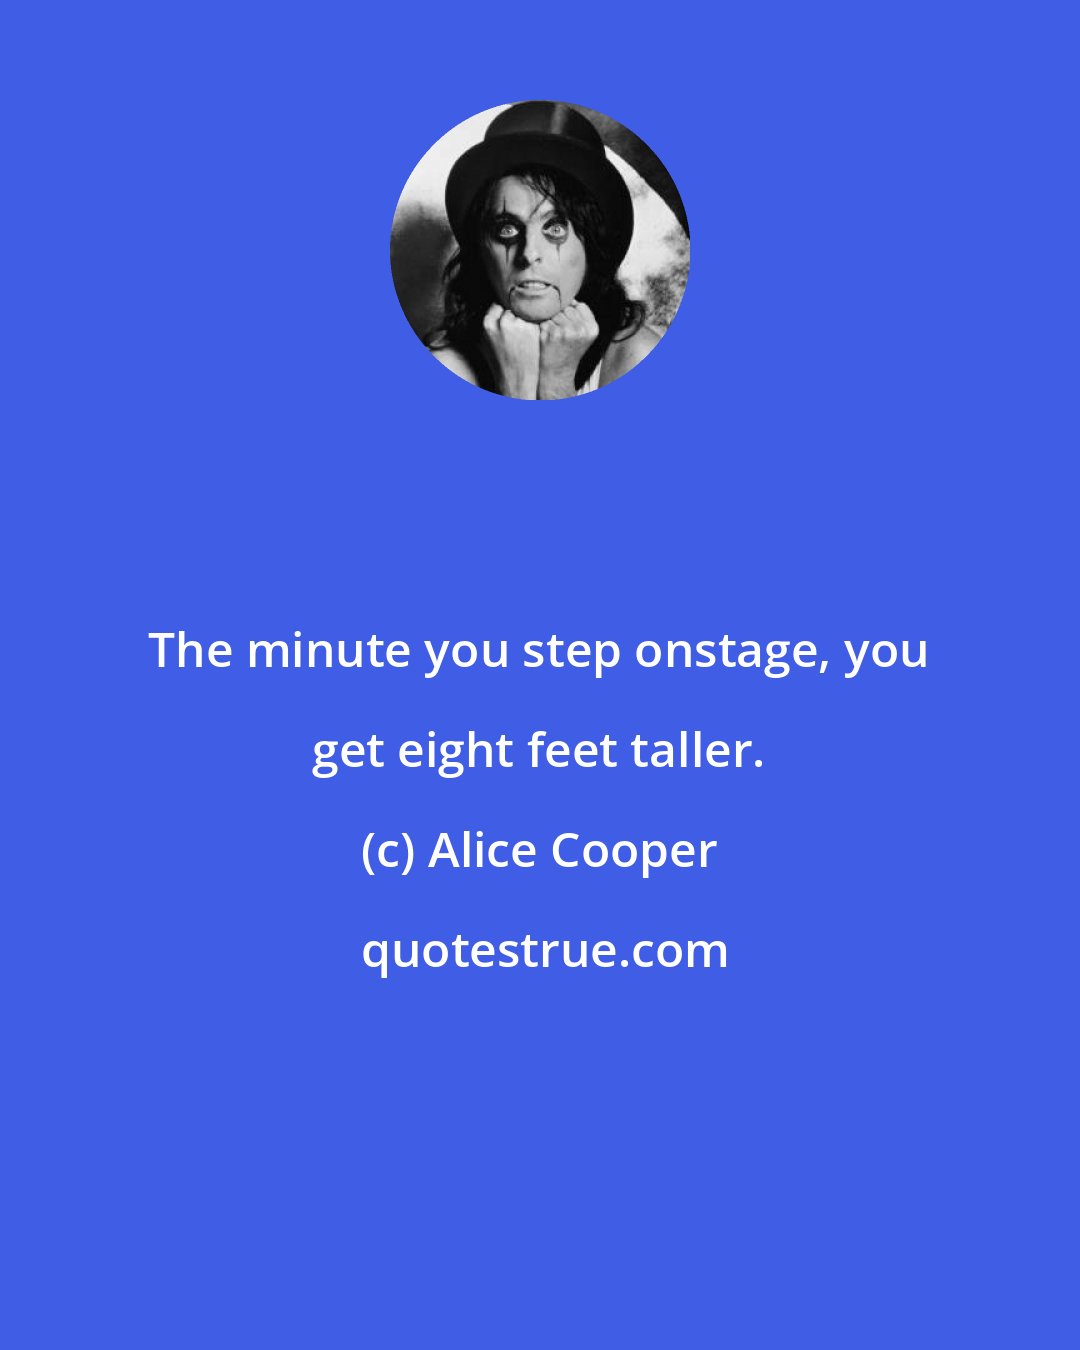 Alice Cooper: The minute you step onstage, you get eight feet taller.